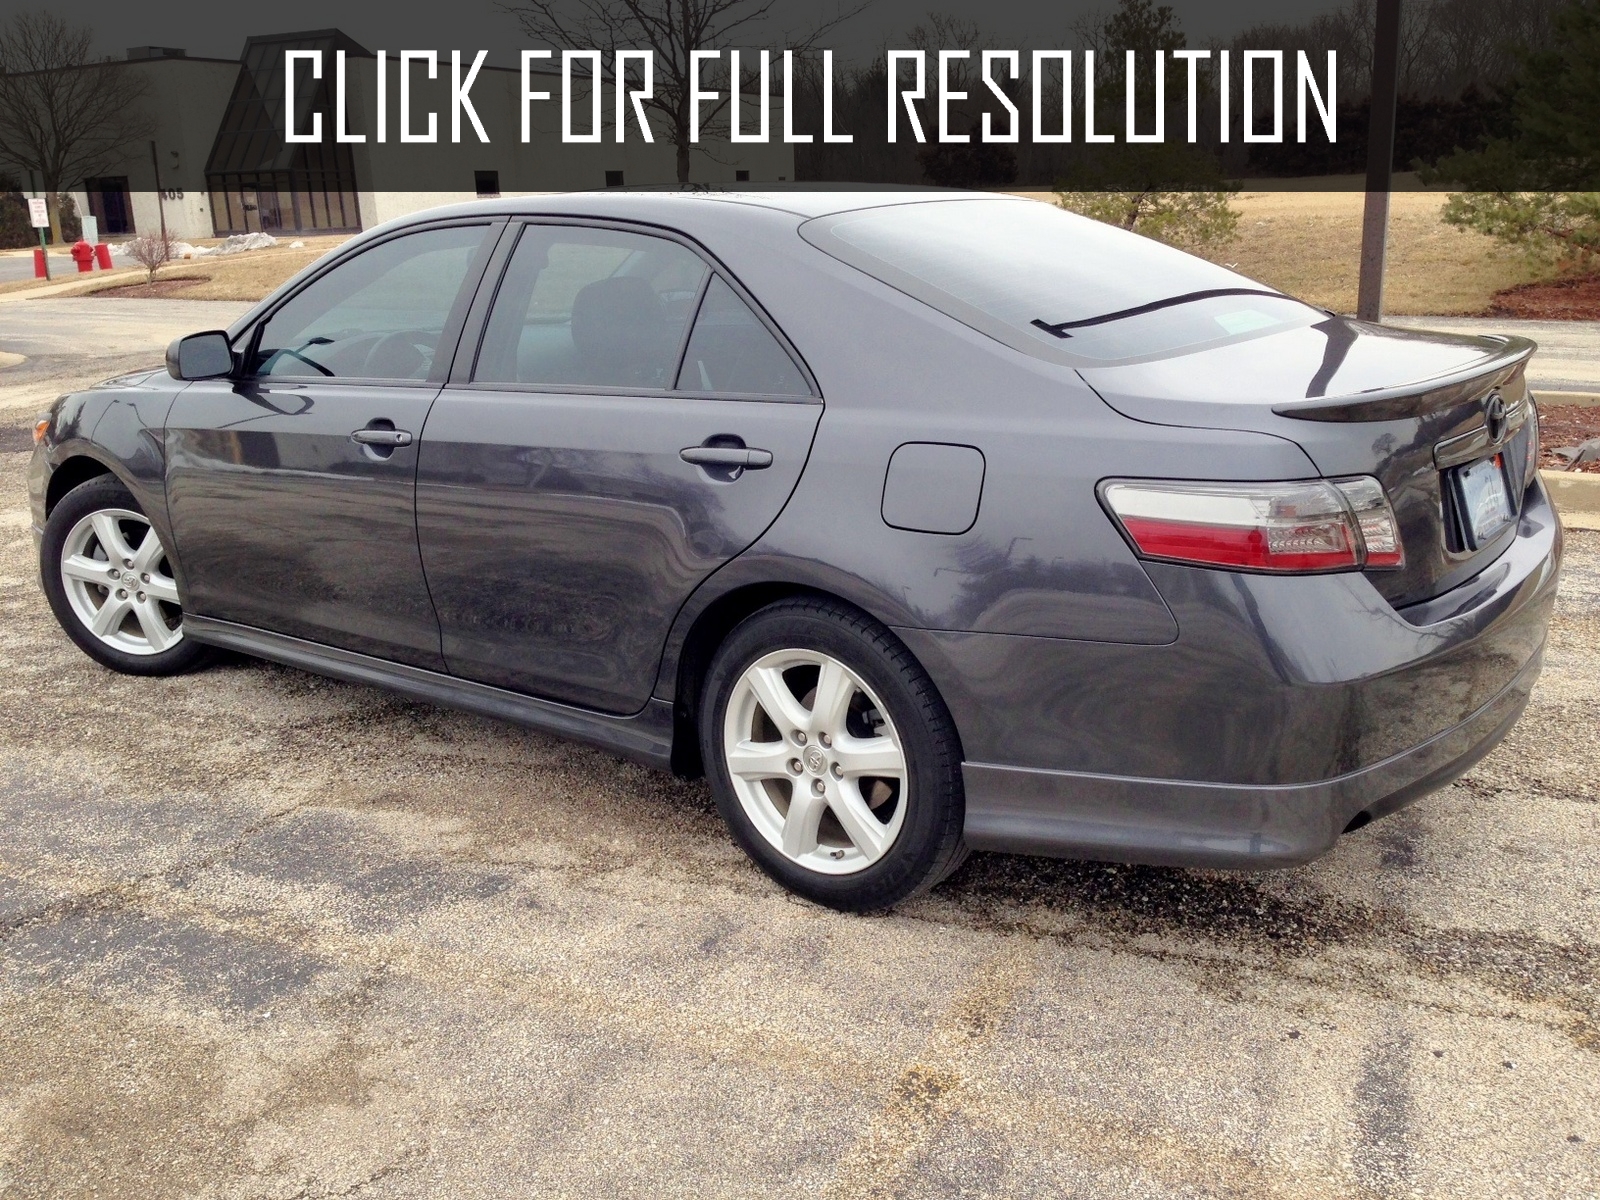 2009 Toyota Camry Se Best Image Gallery 8 15 Share And